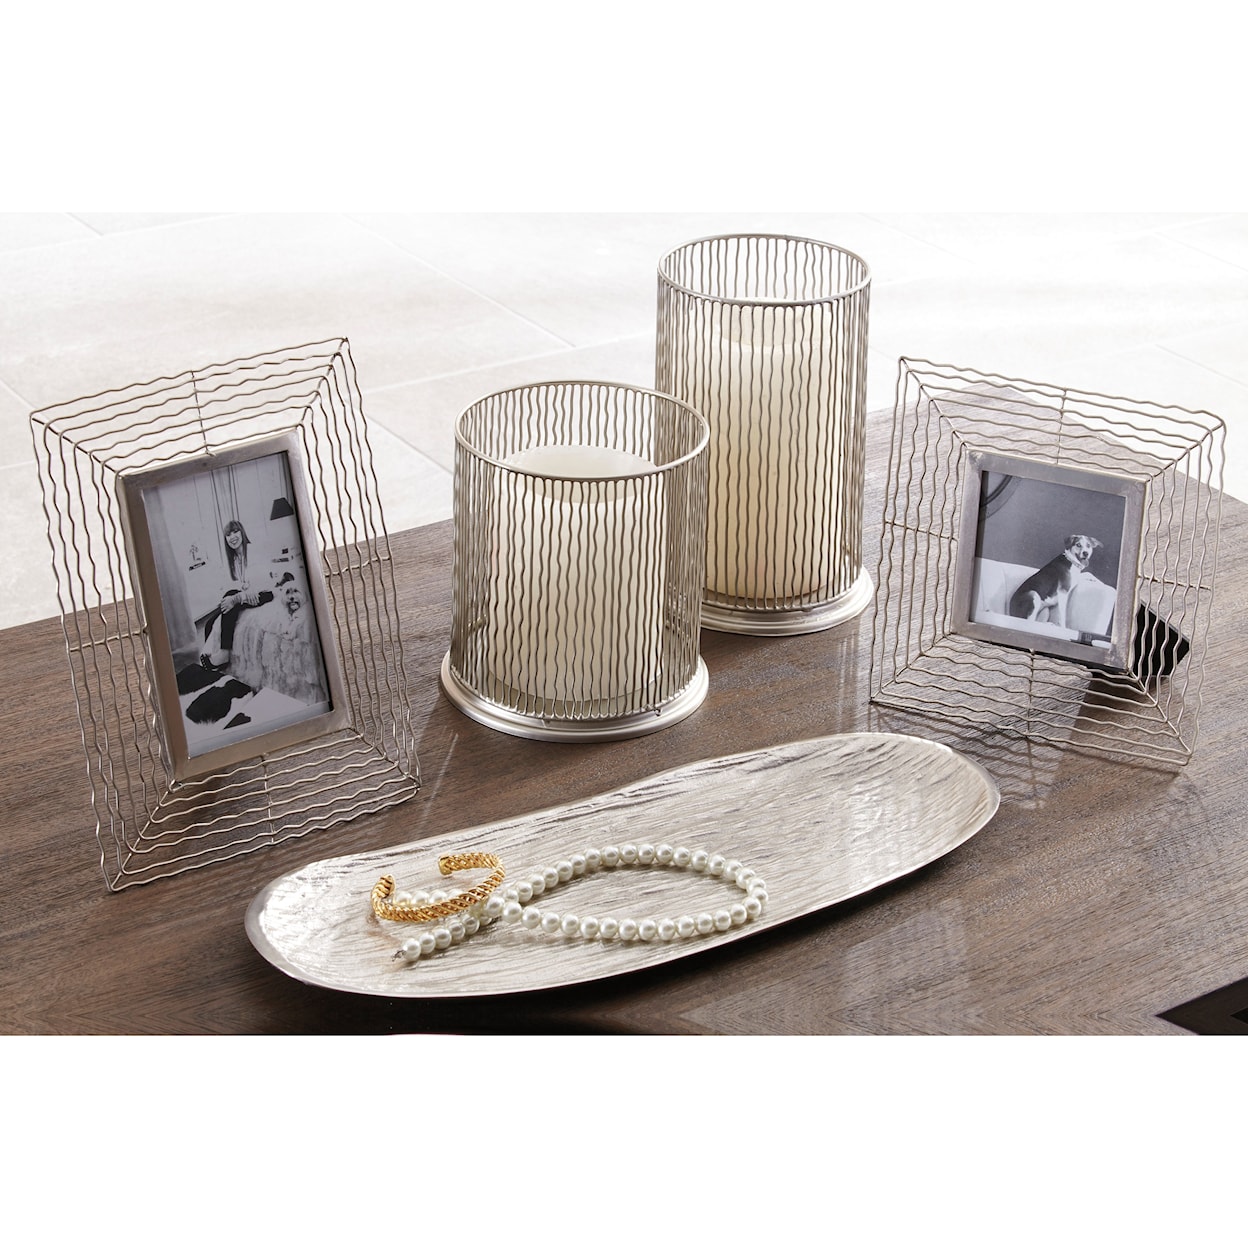 Signature Design by Ashley Accents Dympna Silver Finish Accessory Set